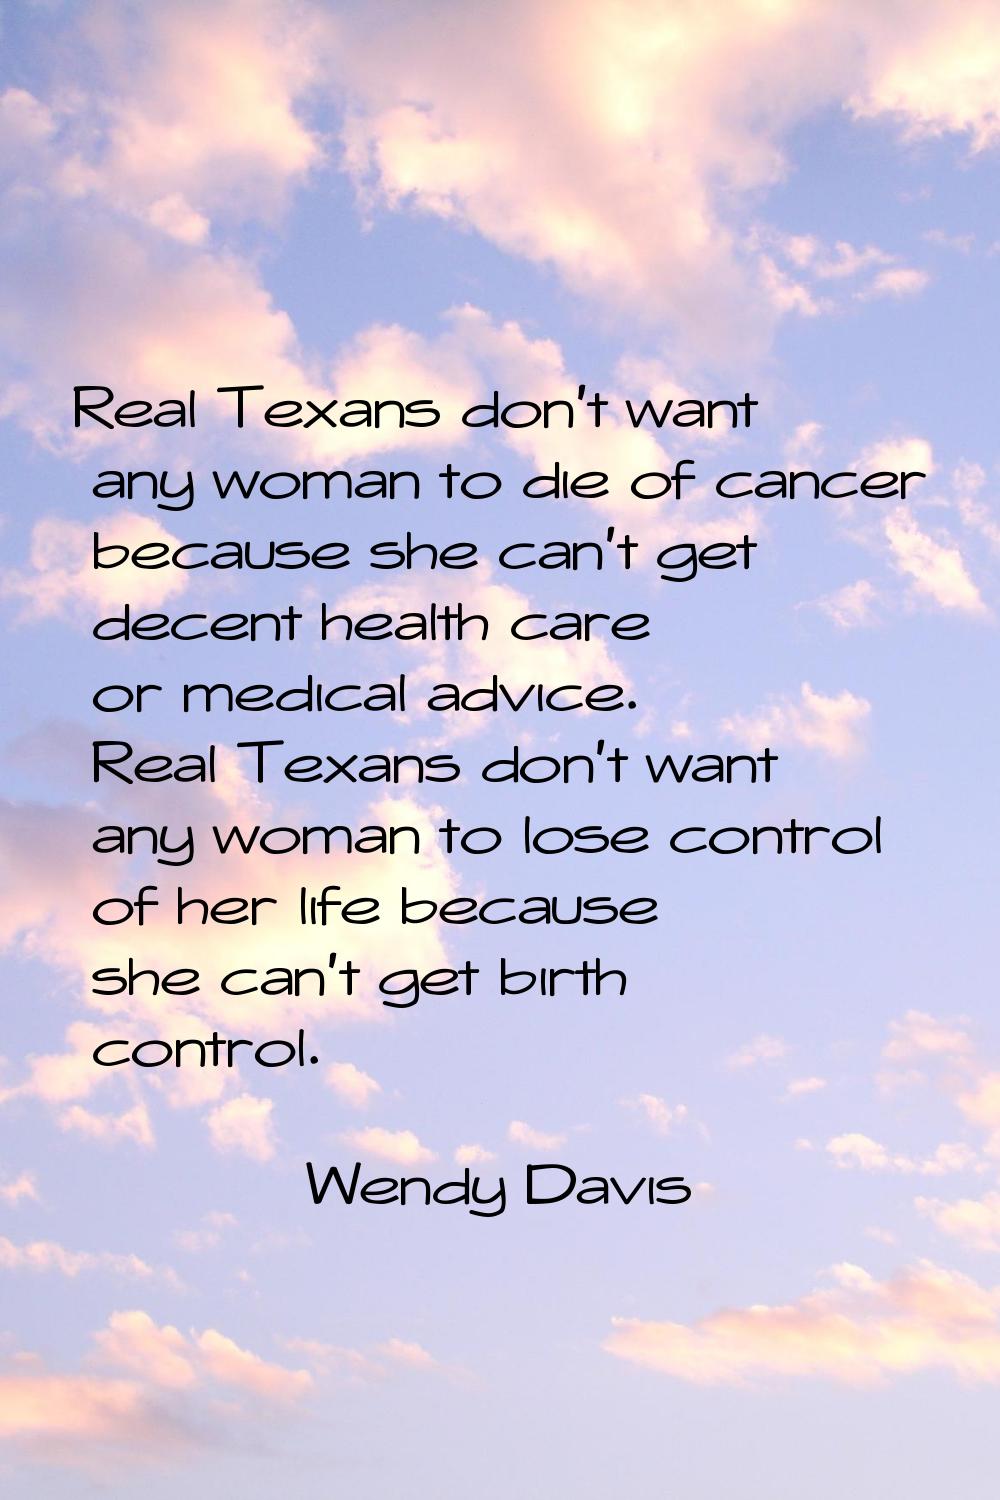 Real Texans don't want any woman to die of cancer because she can't get decent health care or medic